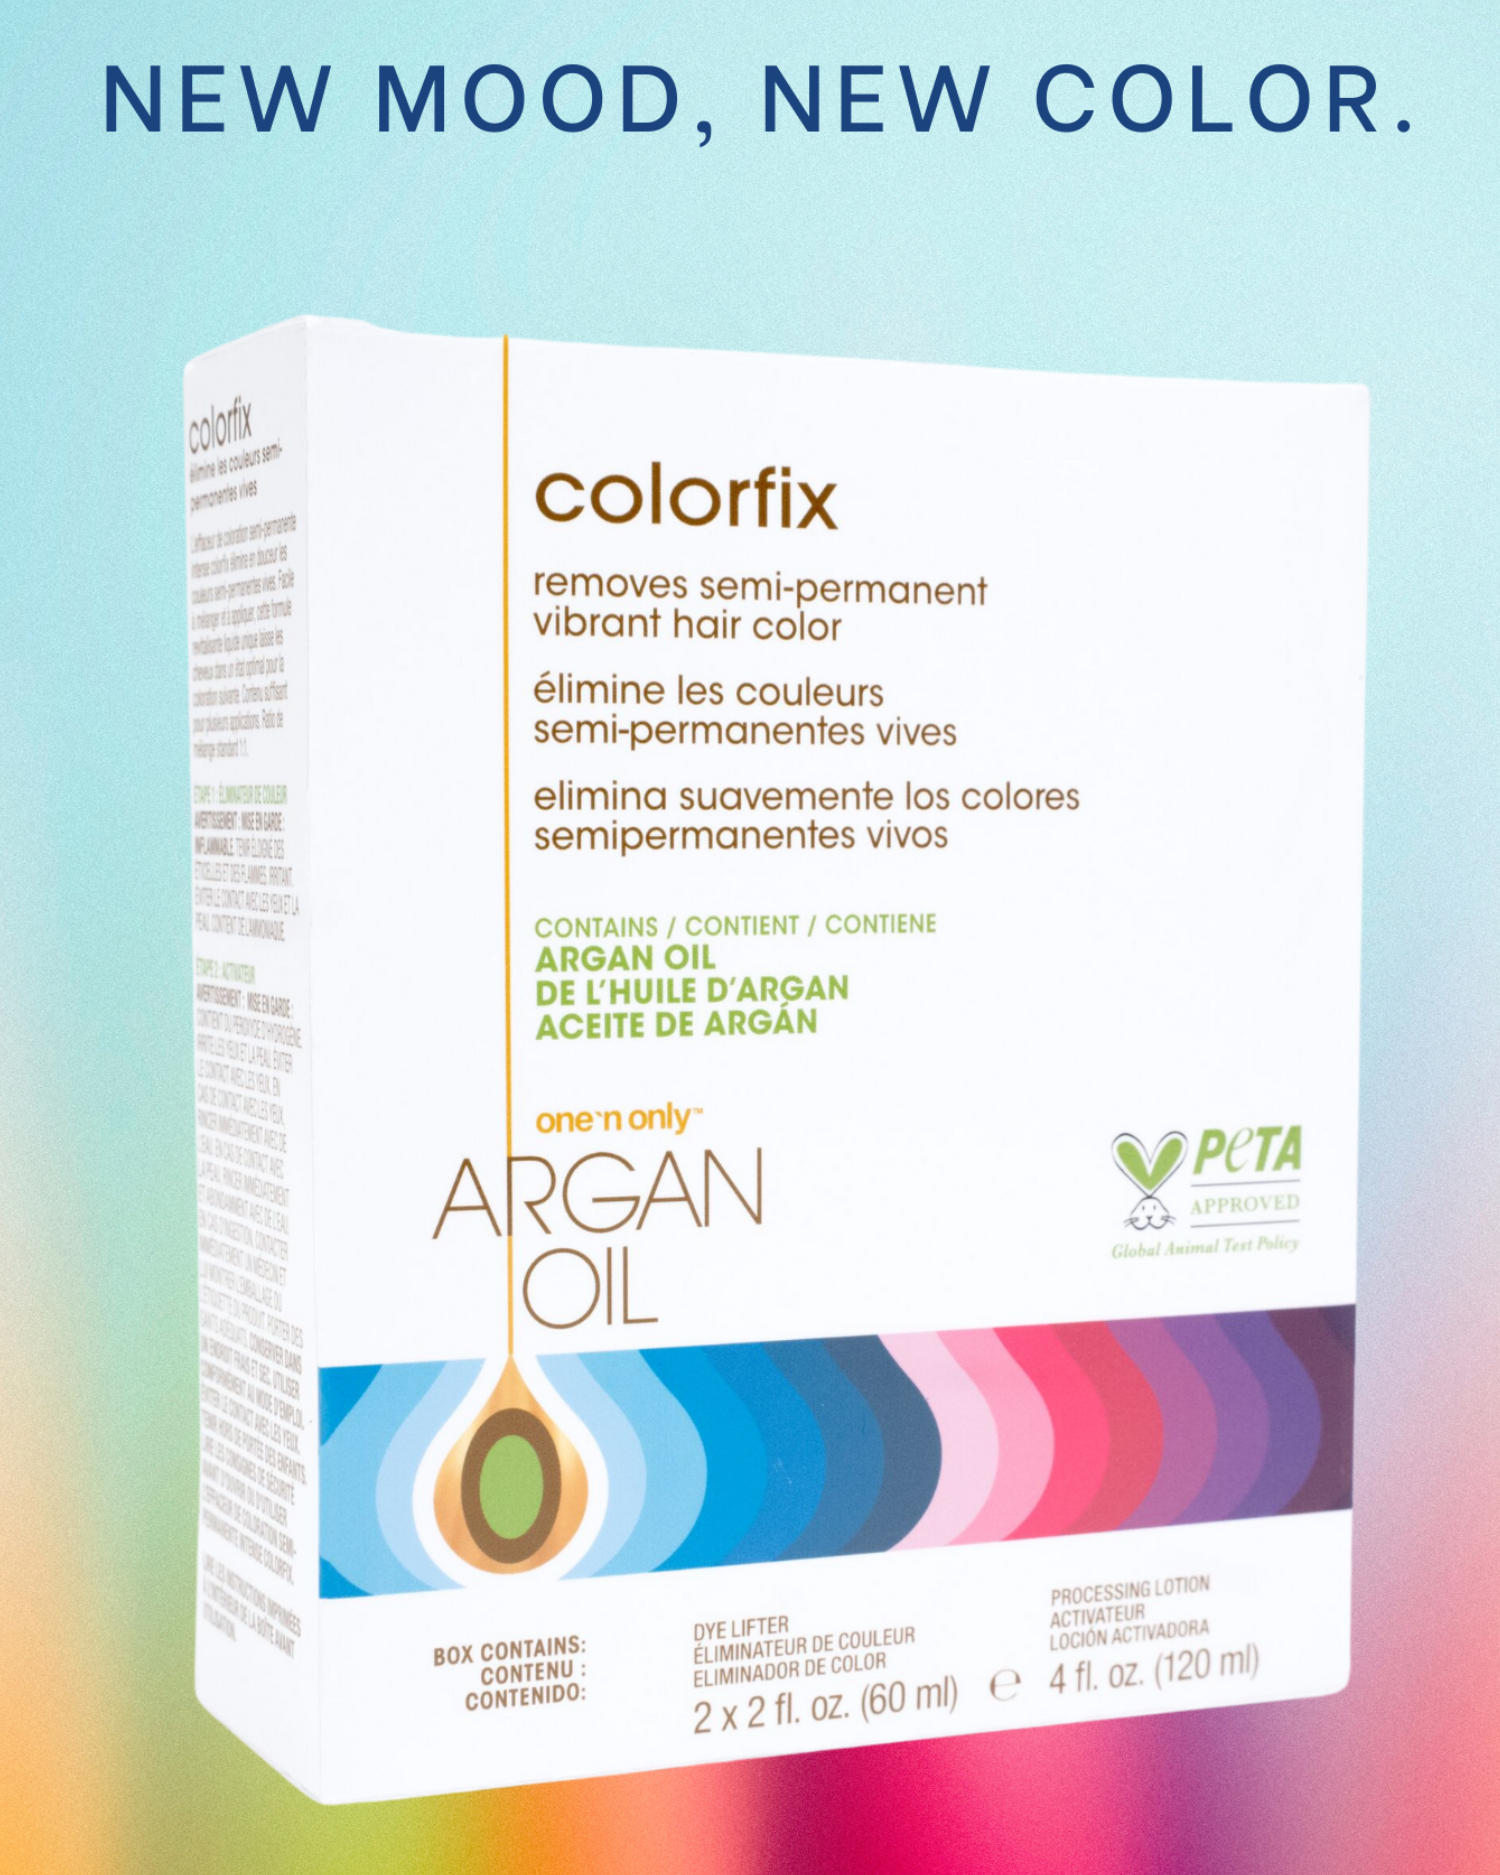 One 'n Only Colorfix Argan Oil Permanent Hair Color Remover